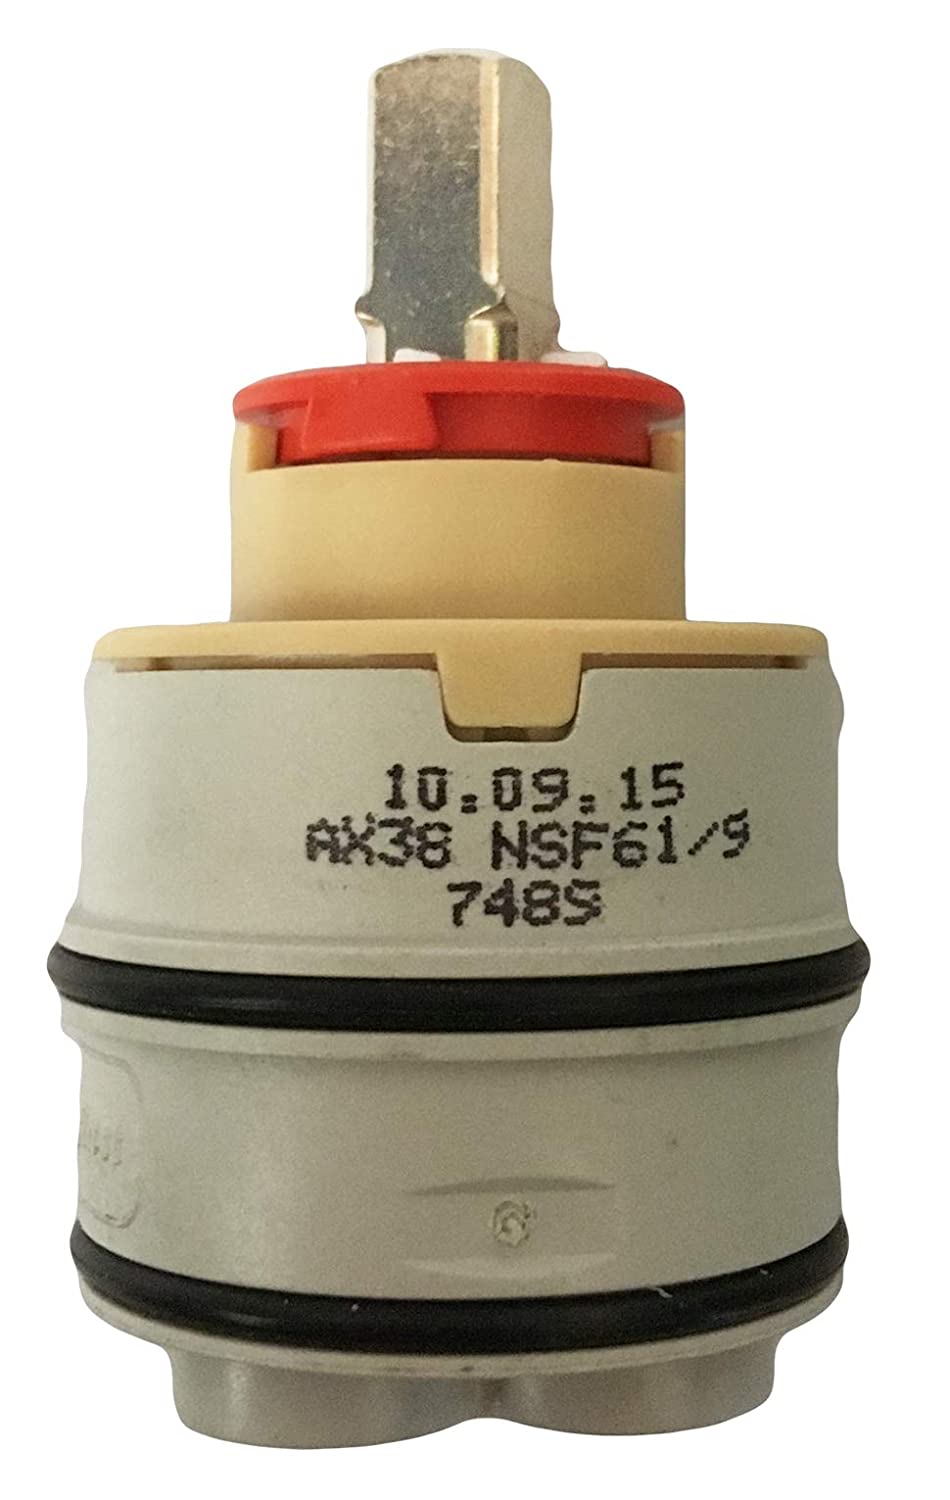 Hydroplast Cartridge Model AX38 for Mixer/Suitable for Jaquar Type Taps/IMP-5023